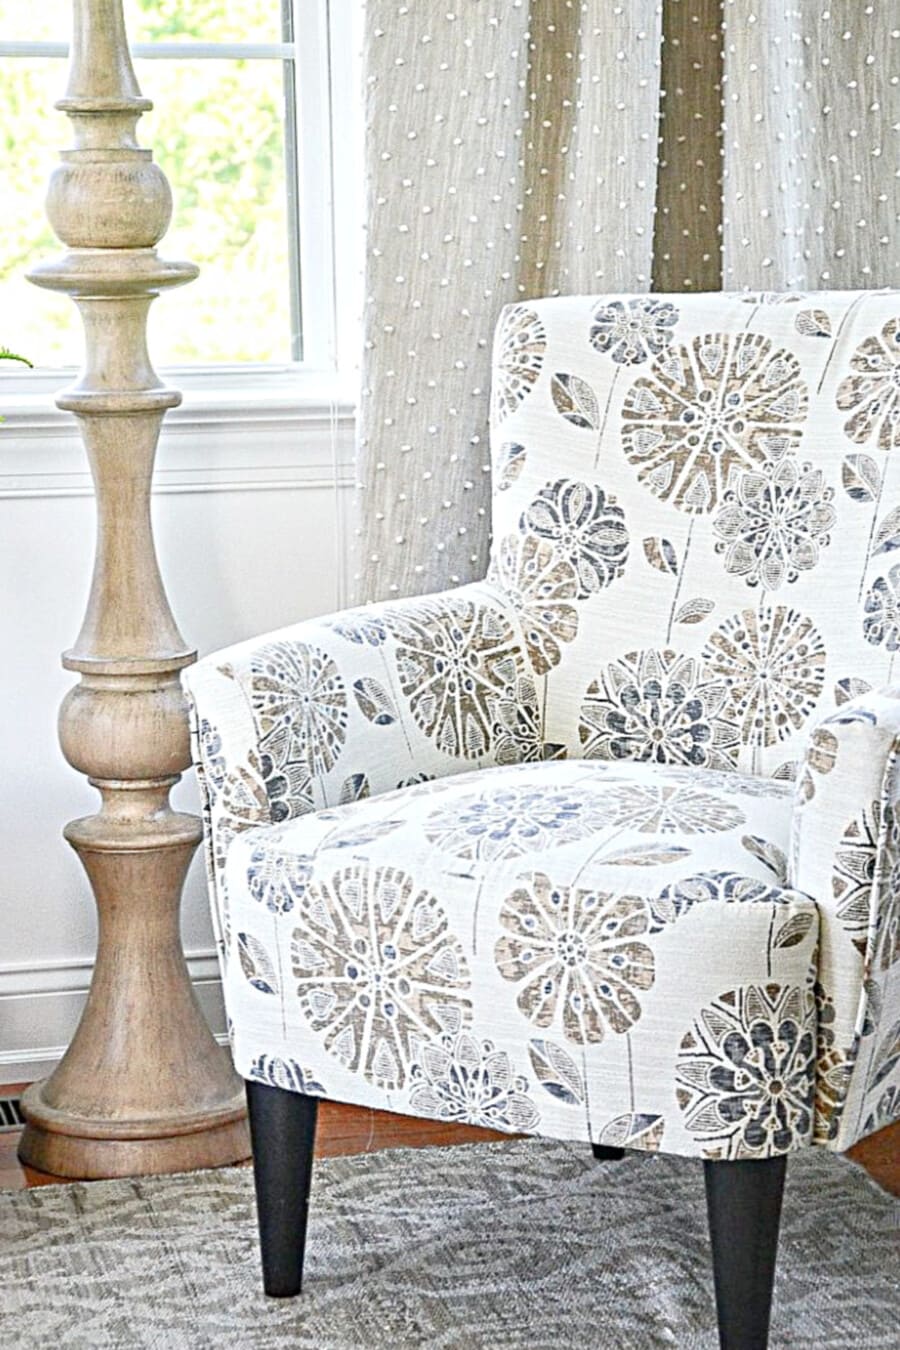 how to choose the best accent chair - stonegable